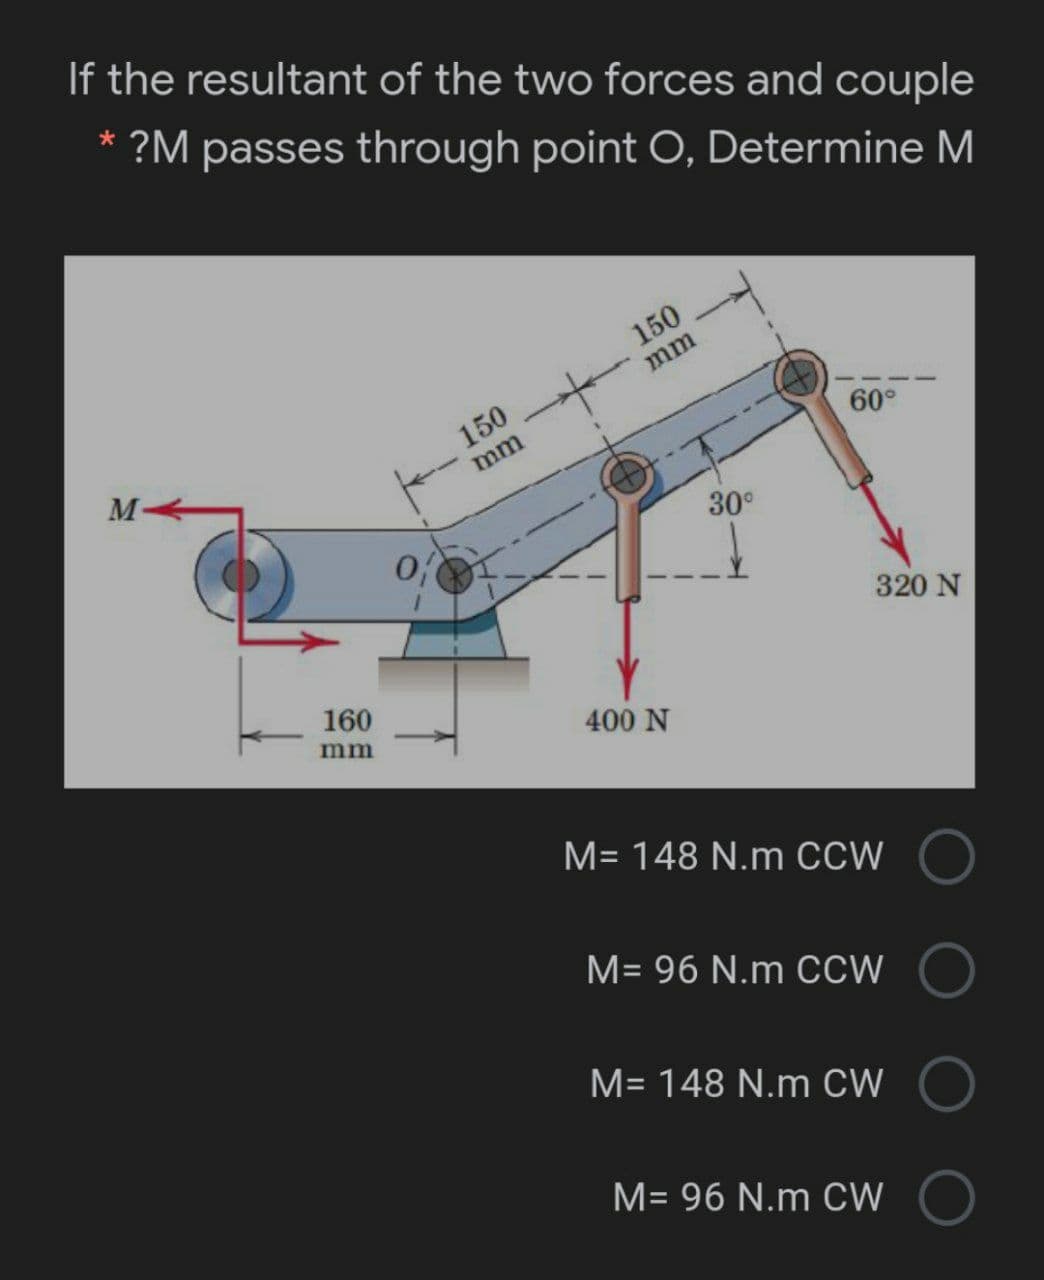 If the resultant of the two forces and couple
* ?M passes through point O, Determine M
150
mm
150
M-
60°
mm
30°
320 N
160
mm
400 N
M= 148 N.m CCW
M= 96 N.m CCW
M= 148 N.m CW
M= 96 N.m CW
